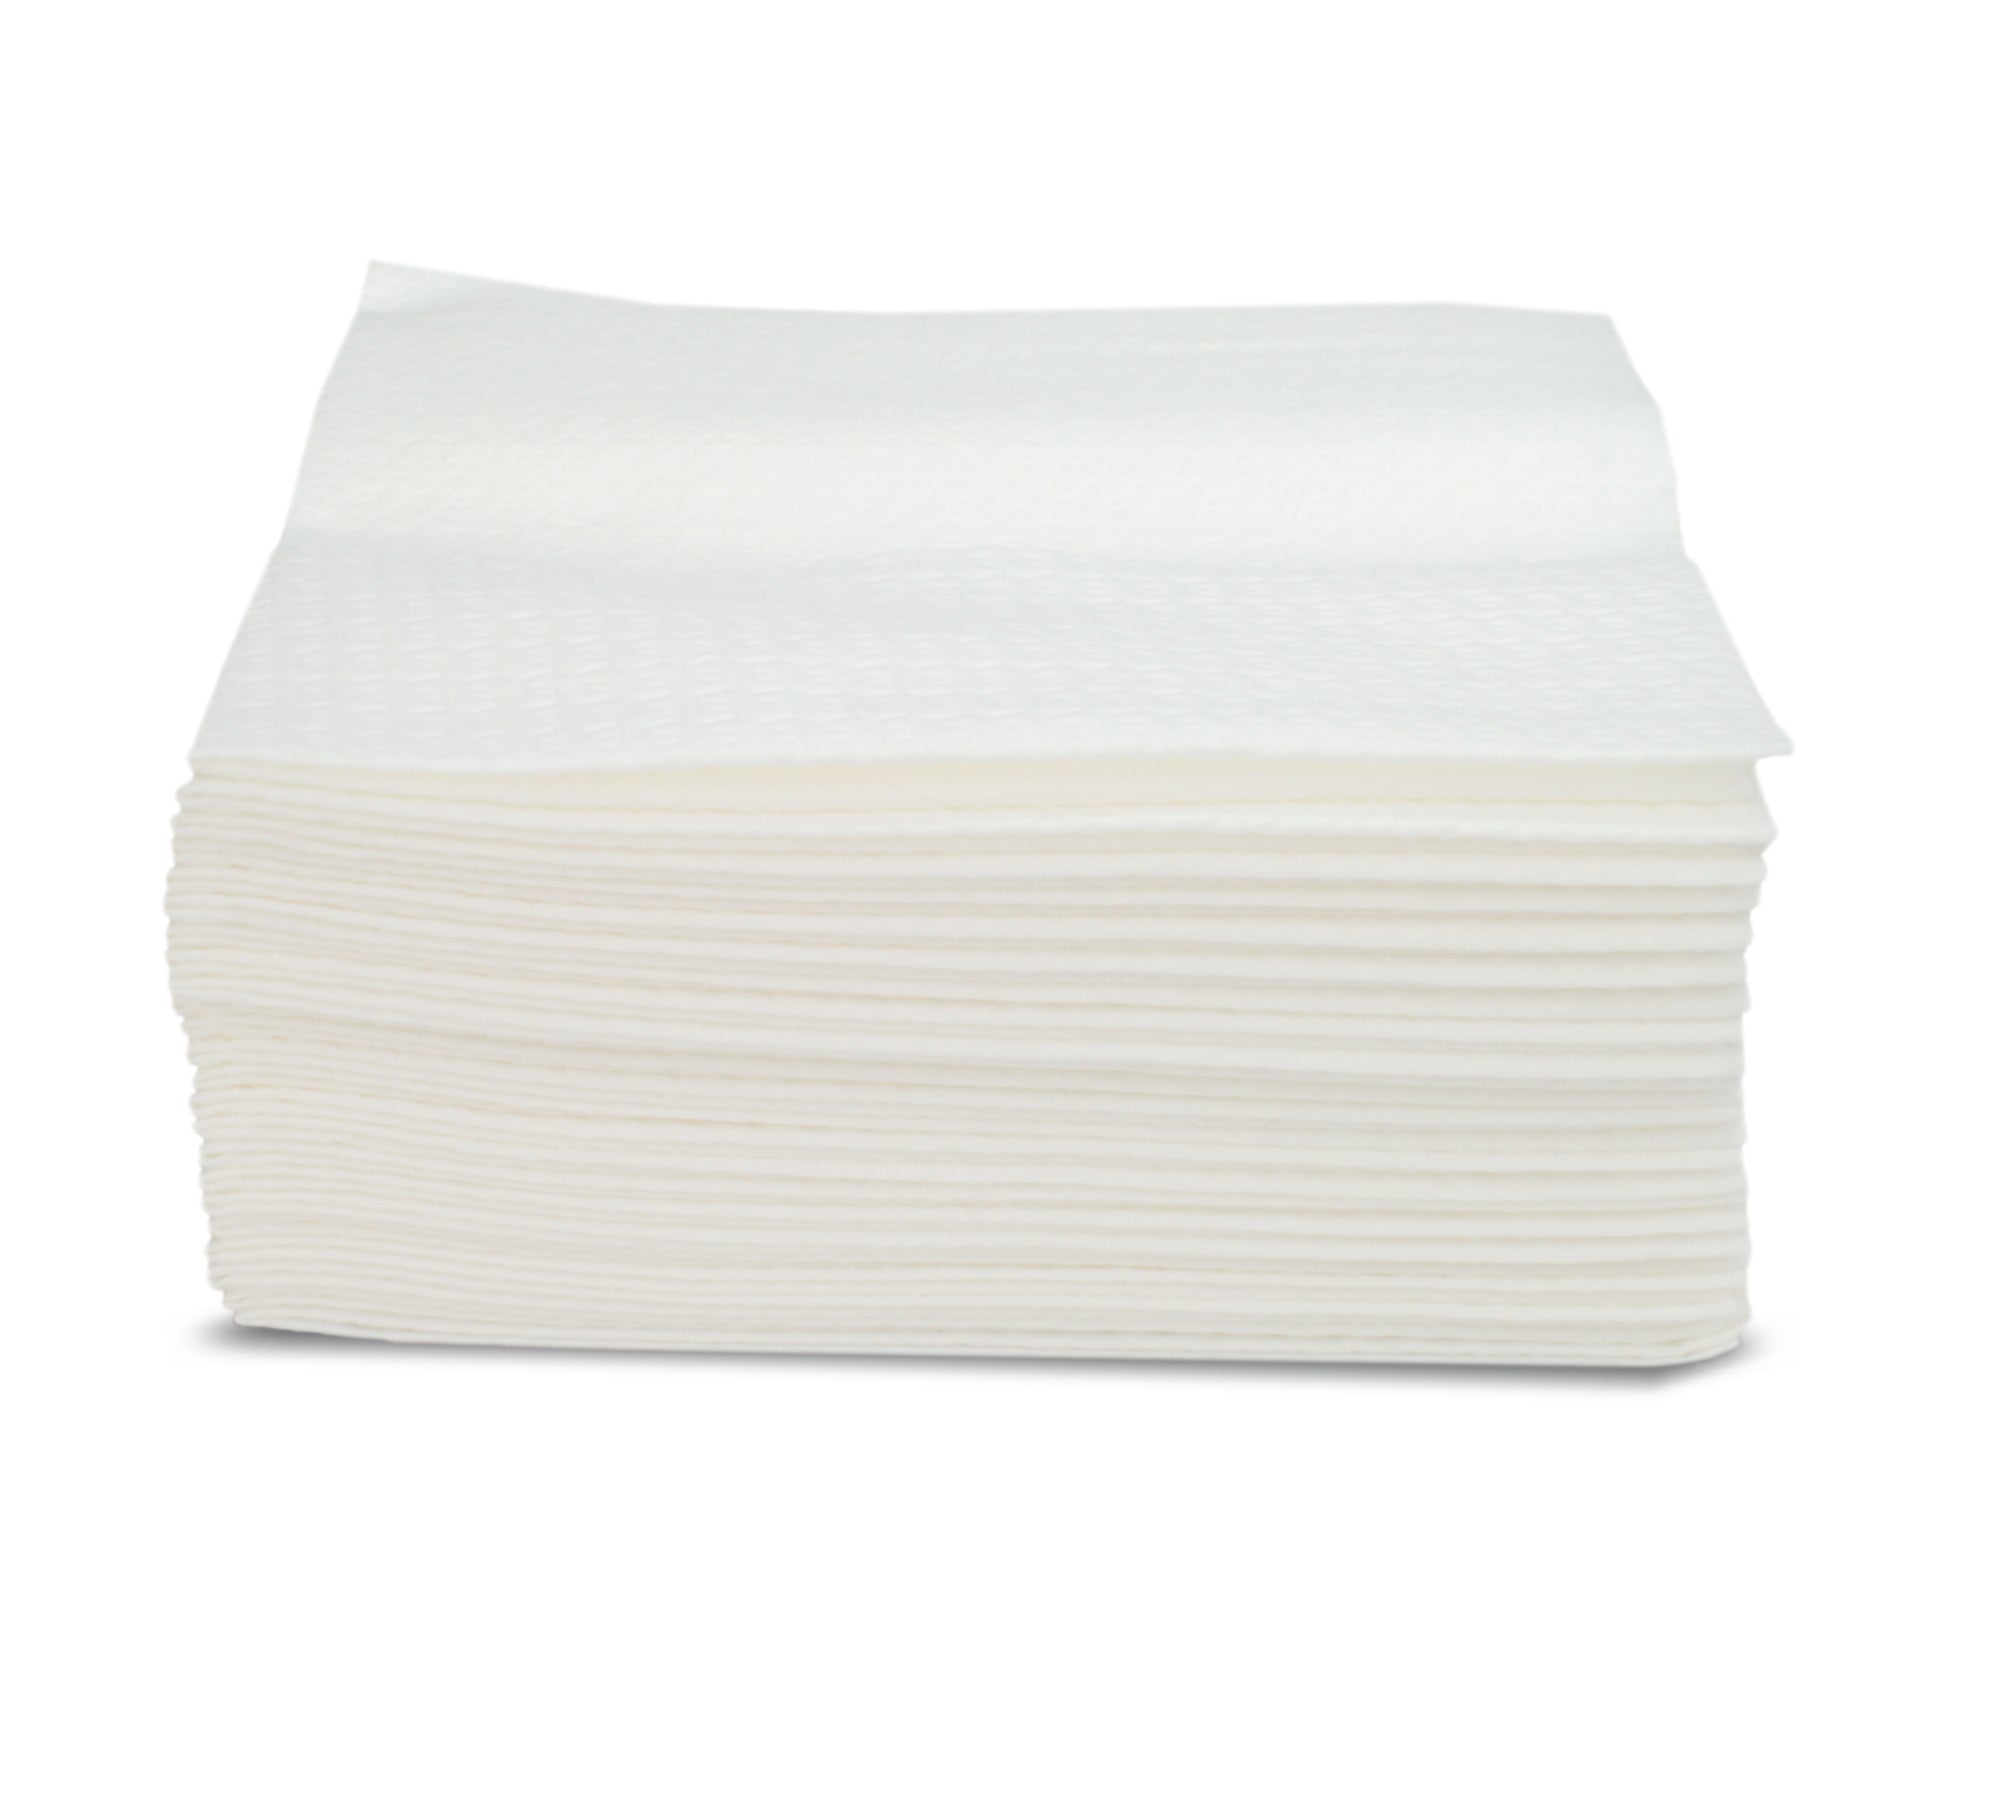 Oil absorbent towels 24 pieces